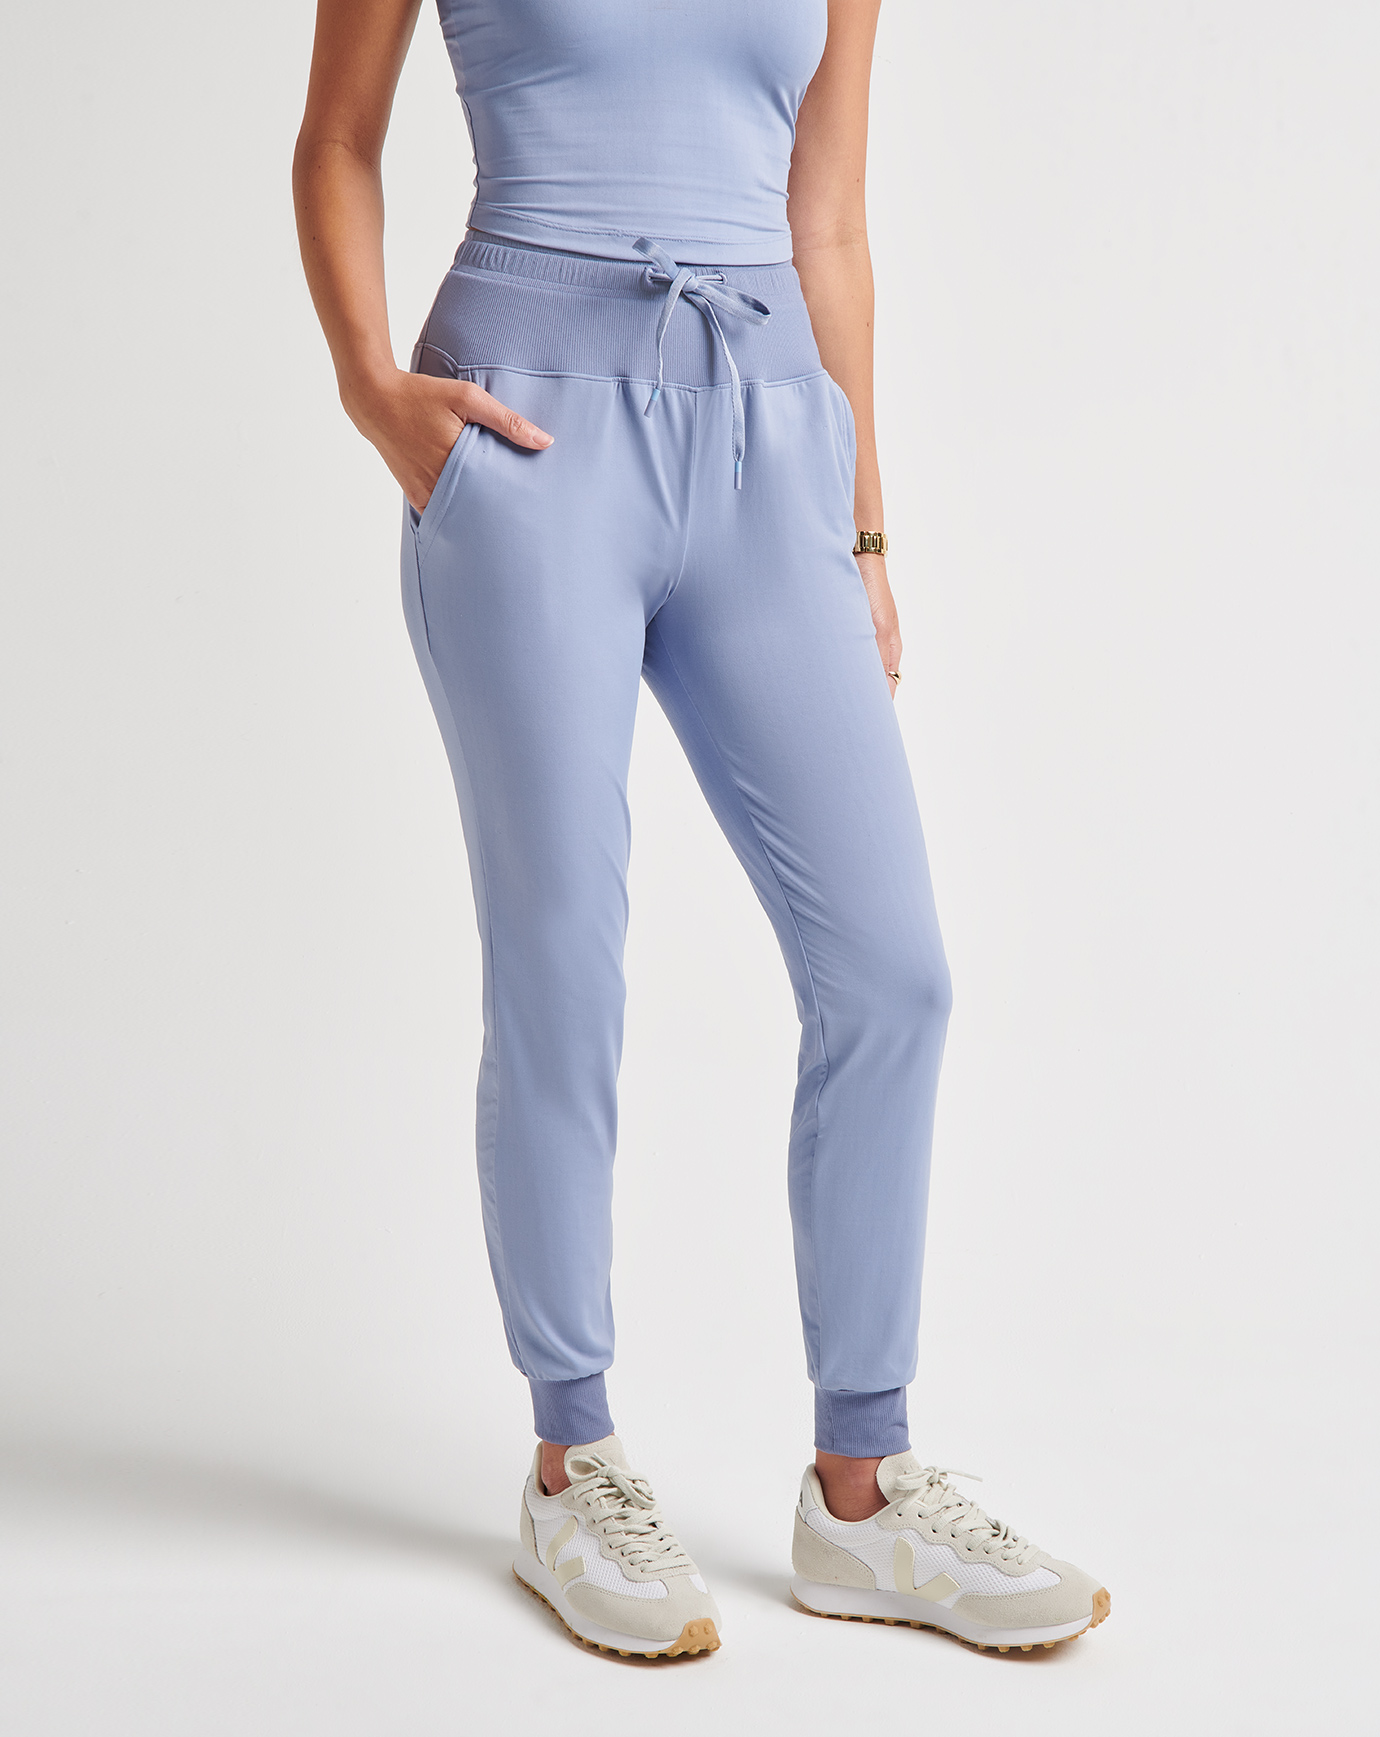 BeGym Joggers for Women  5 Benefits of Wearing Sweat Pants in the Gym